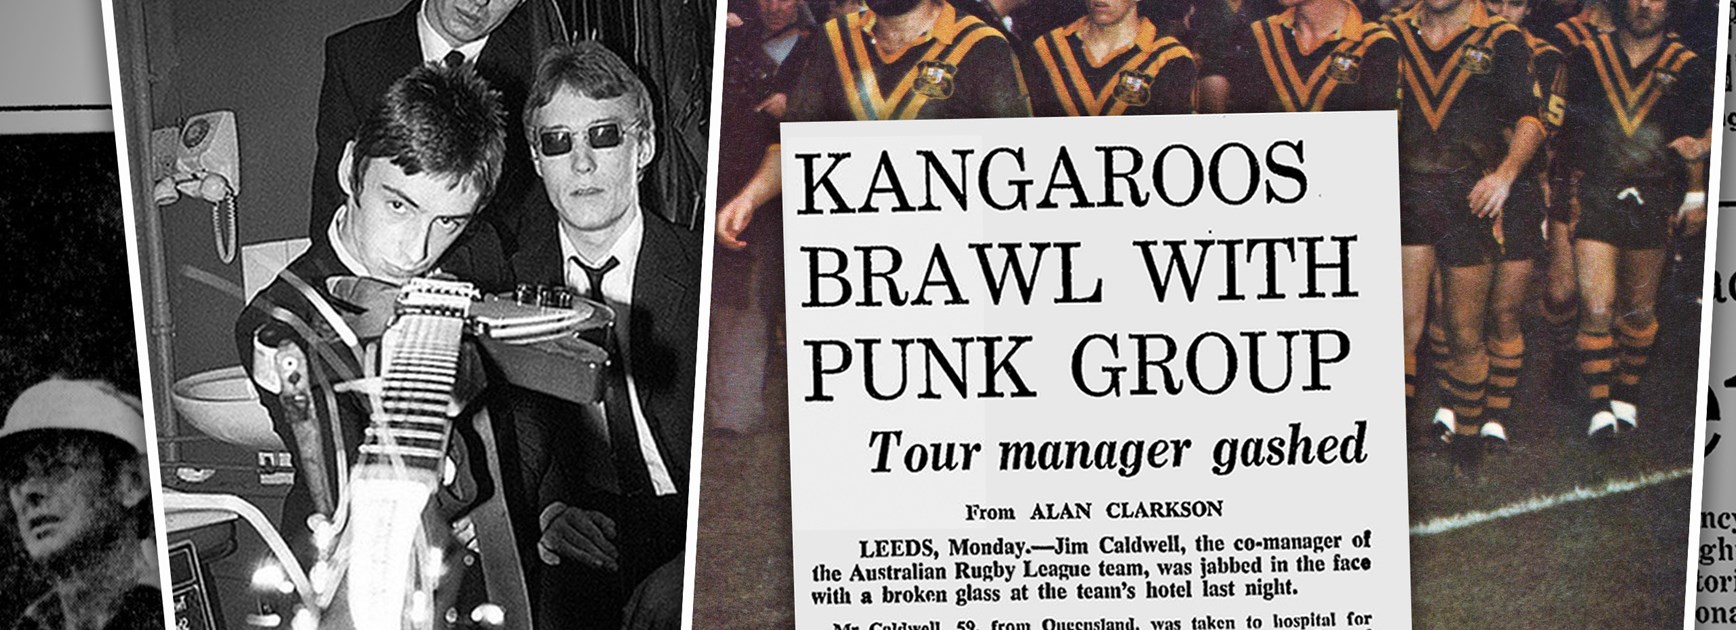 Beat surrender: When Kangaroos clashed with The Jam